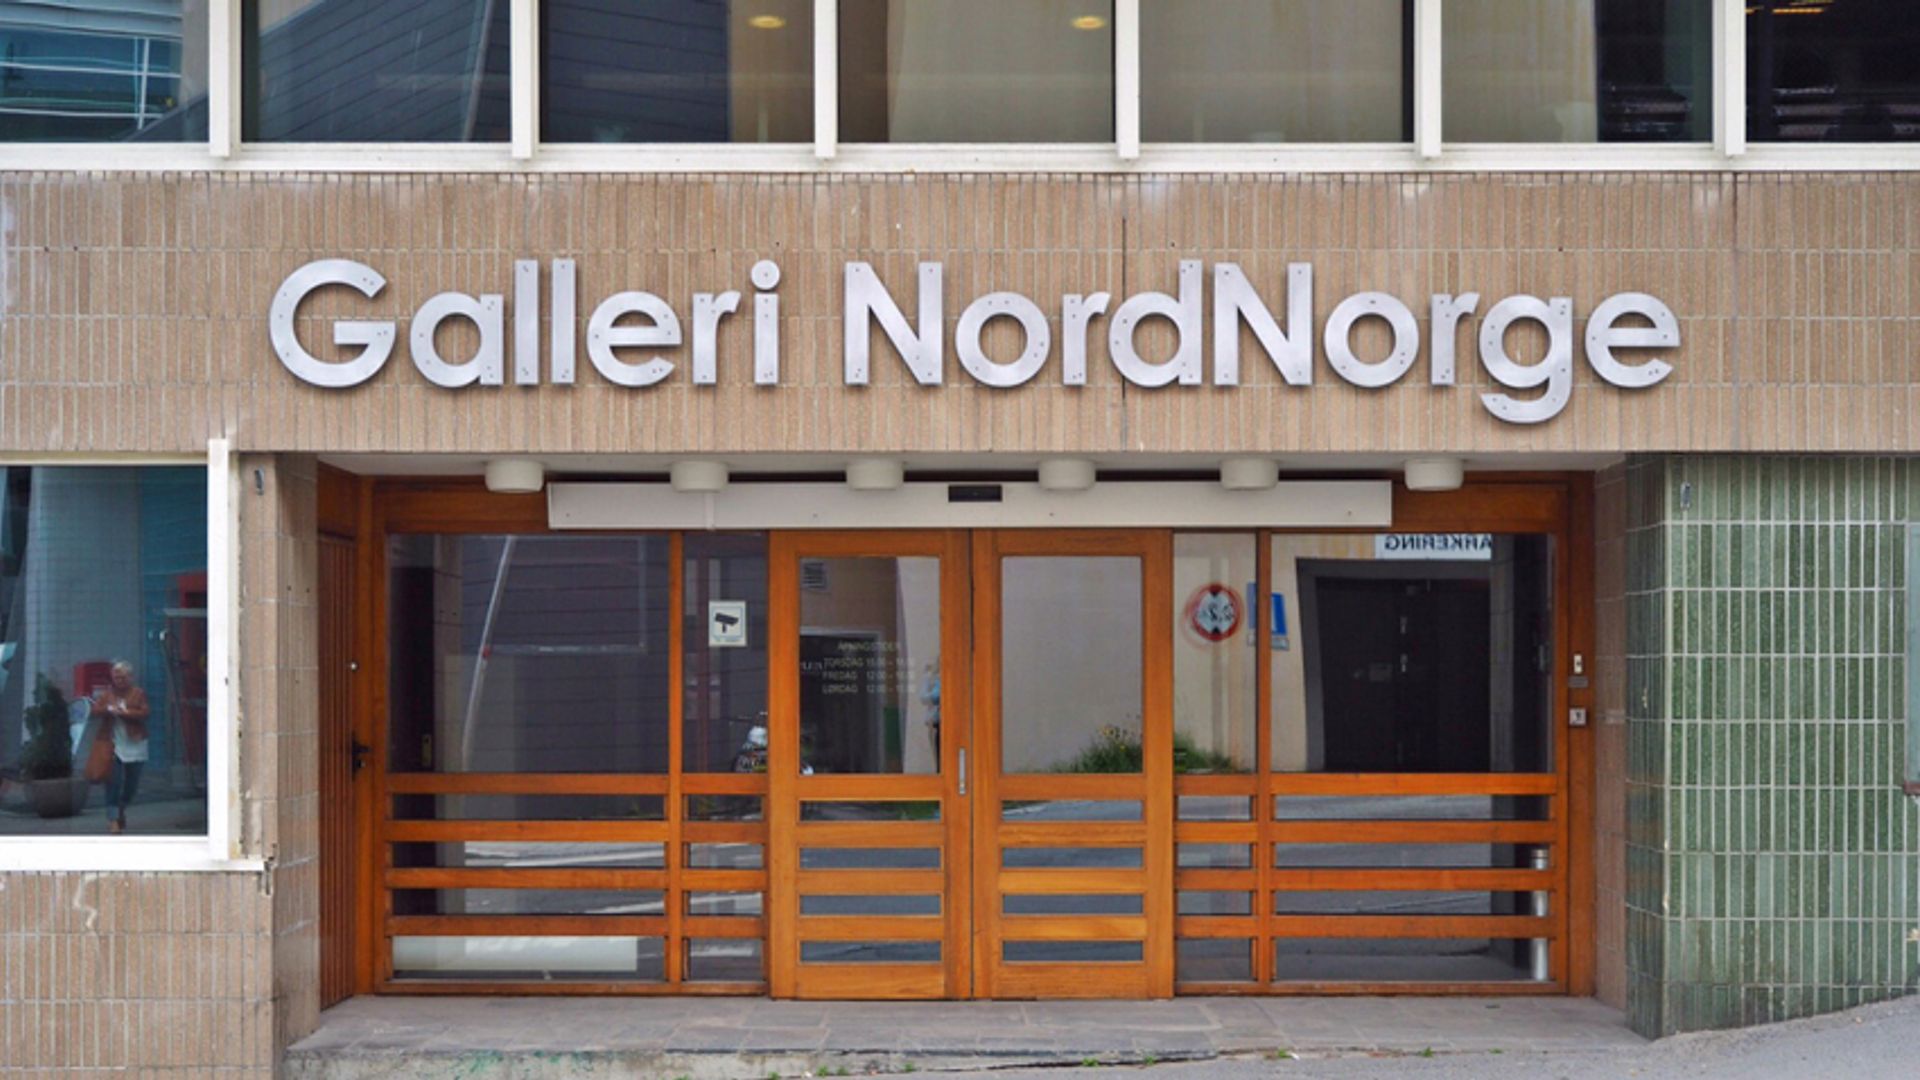 Galleri Nord-Norge